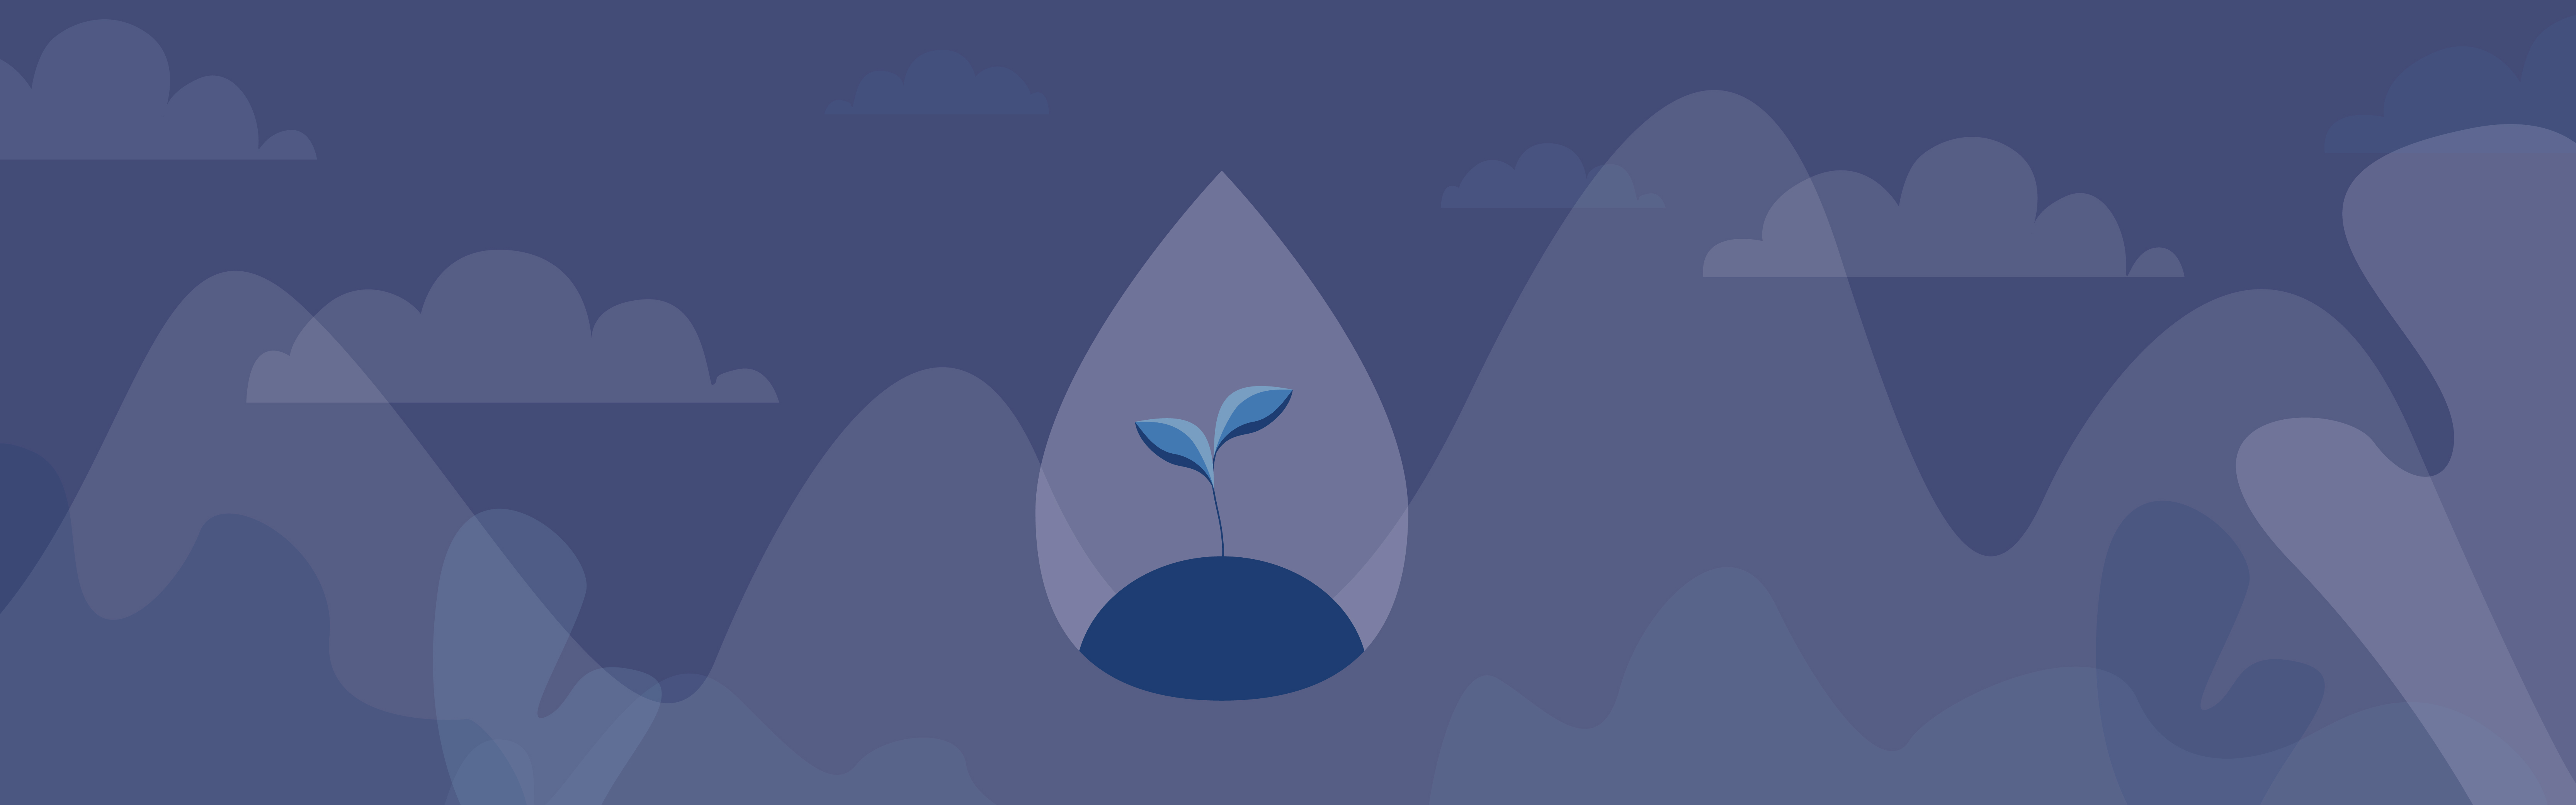 Grief graphic of sprout growing inside teardrop